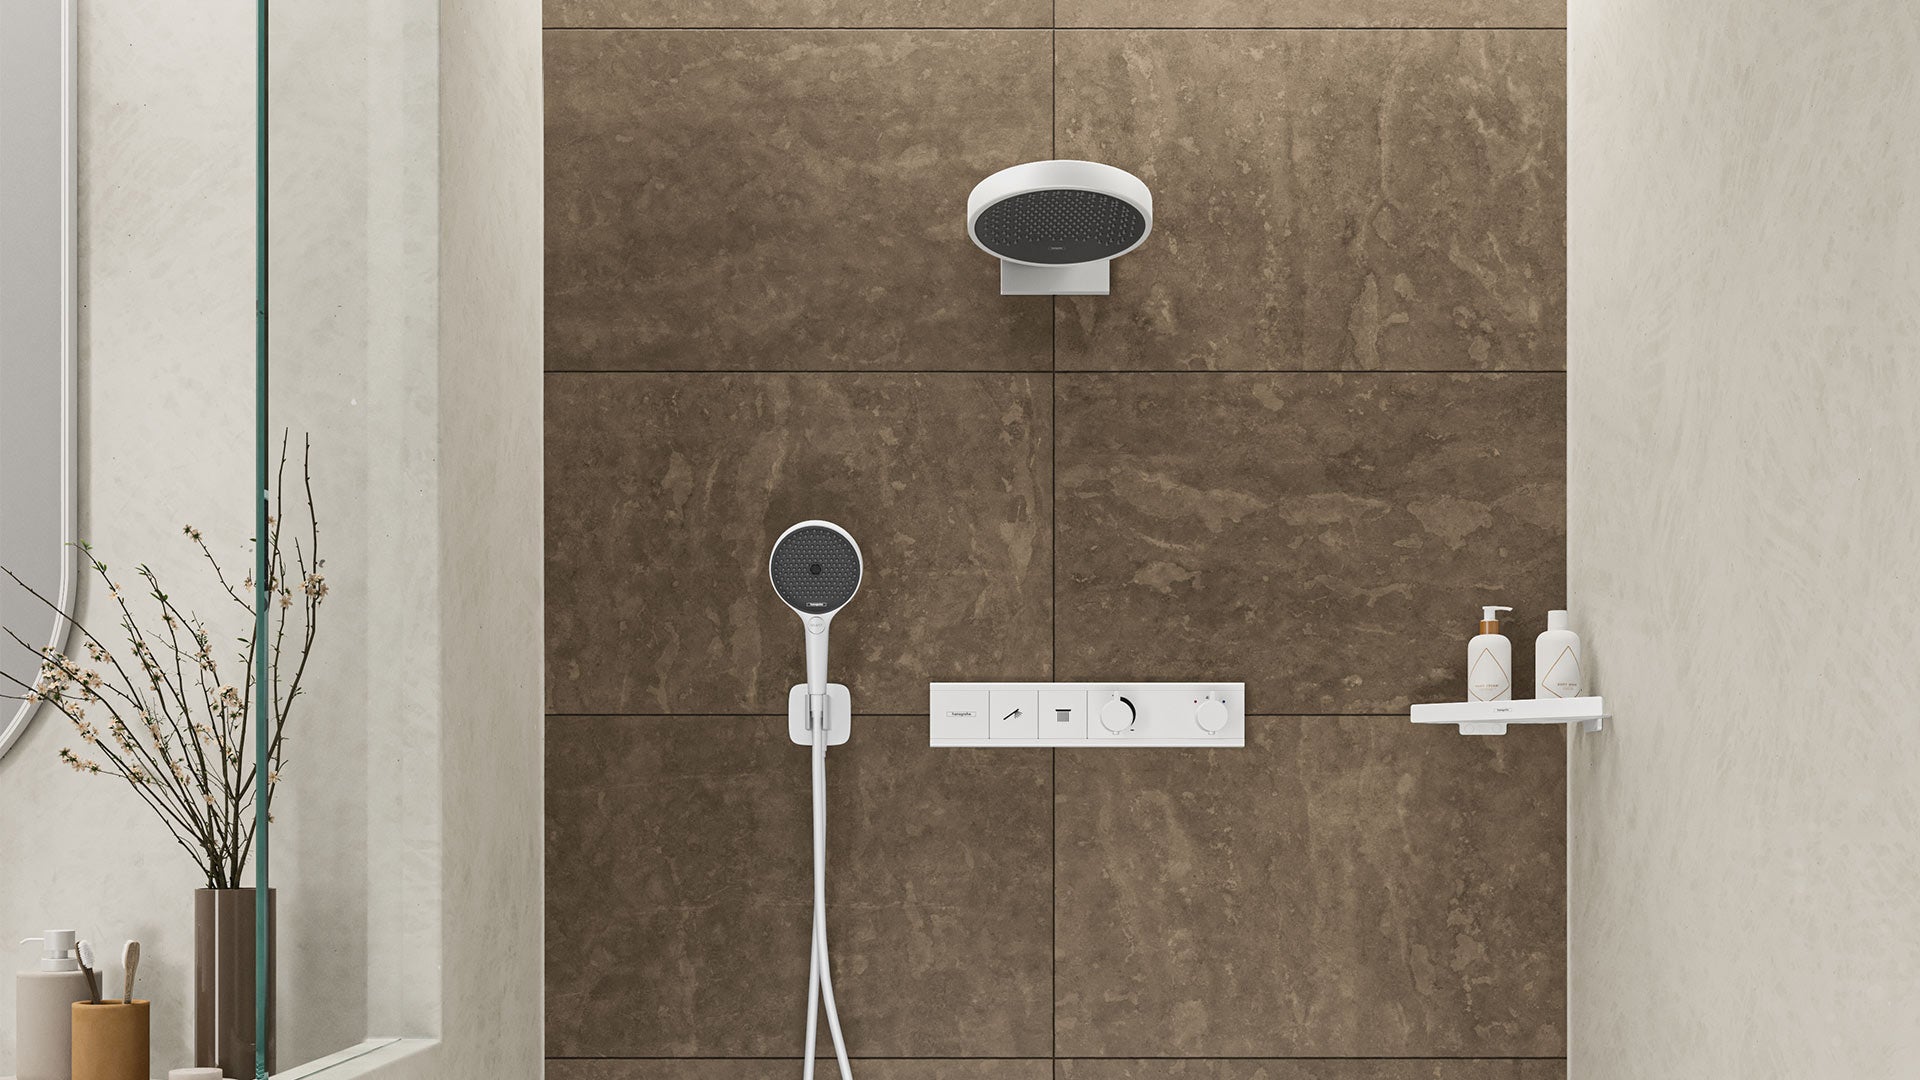 Top 3 Reasons to Choose Hansgrohe for Your Home